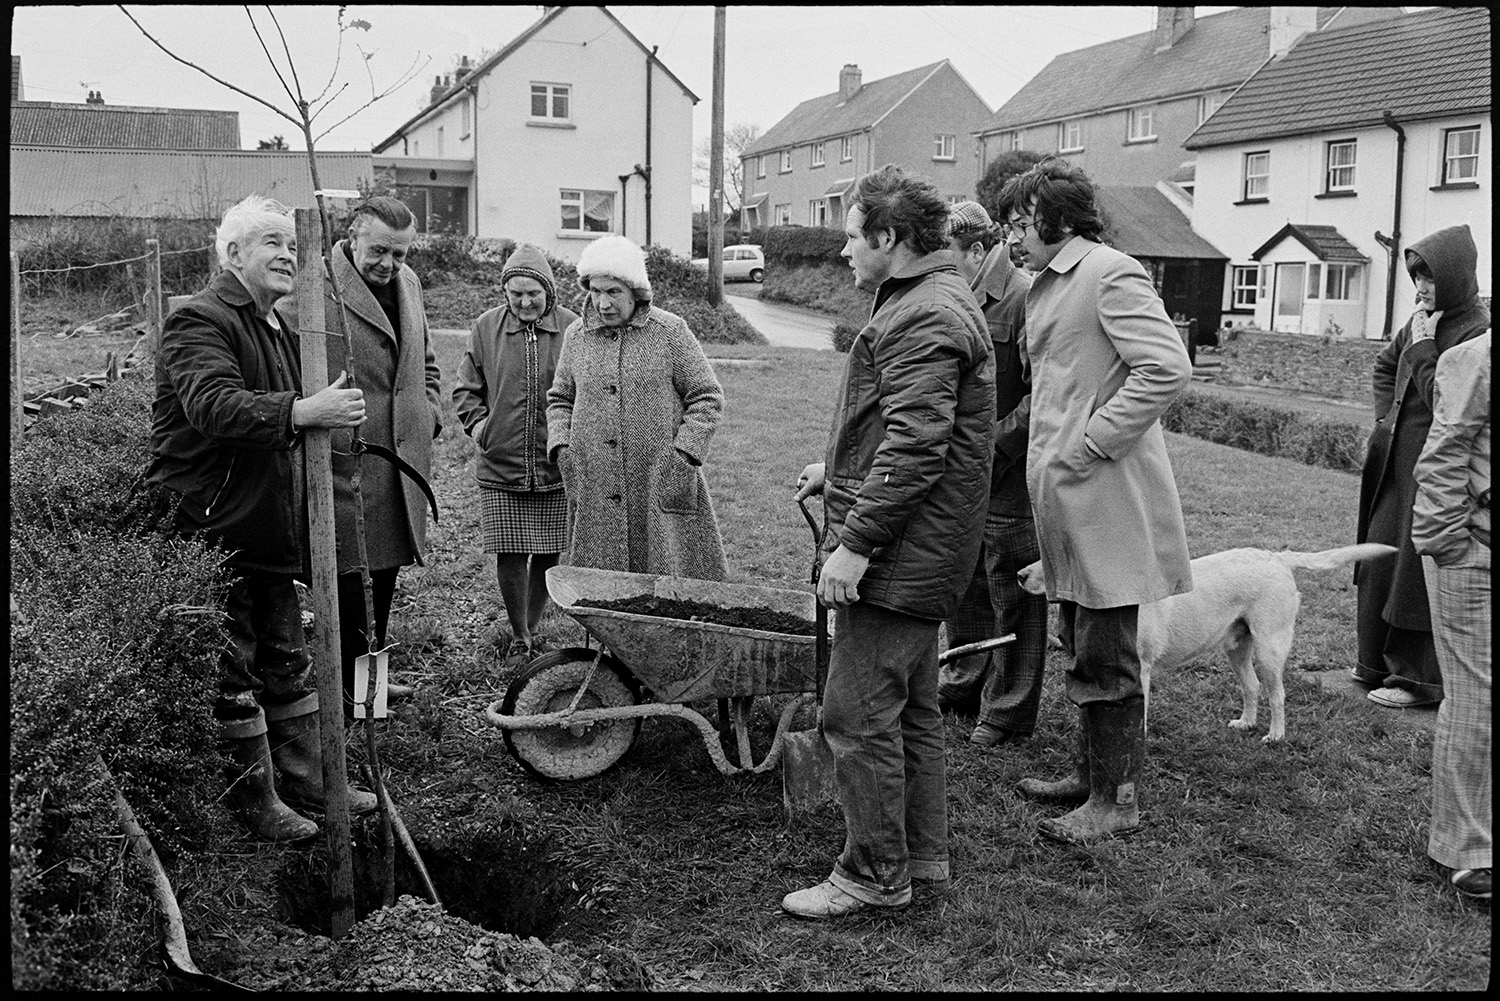 People planting tree to mark the Jubilee. 
[A group of men and women planting a tree in Atherington to celebrate the Silver Jubilee of Queen Elizabeth II. A man is holding the tree, while another man gets ready to fill the hole with earth from a wheelbarrow. A dog is watching with a group of people.]